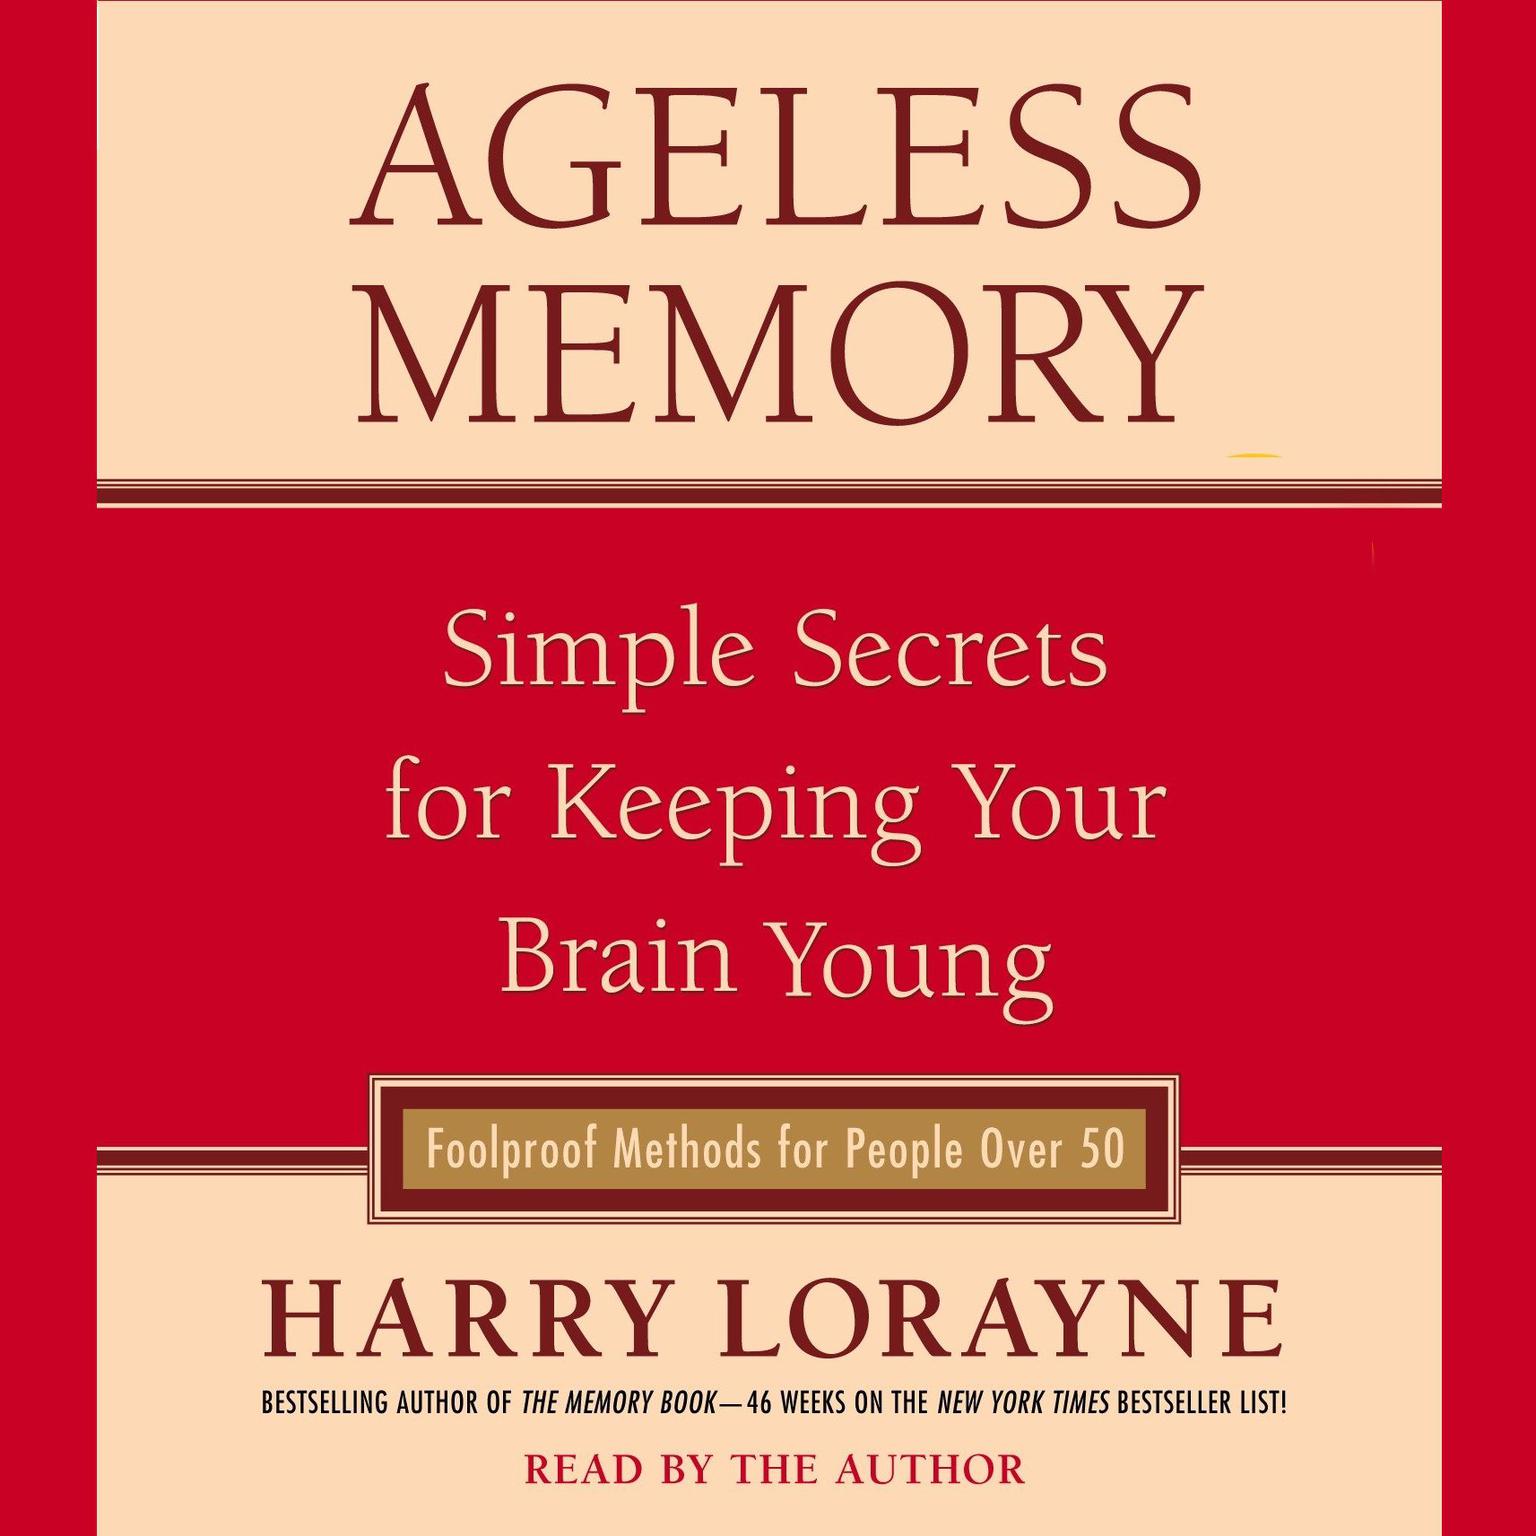 Ageless Memory (Abridged): Simple Secrets for Keeping Your Brain Young--Foolproof Methods for People Over 50 Audiobook, by Harry Lorayne